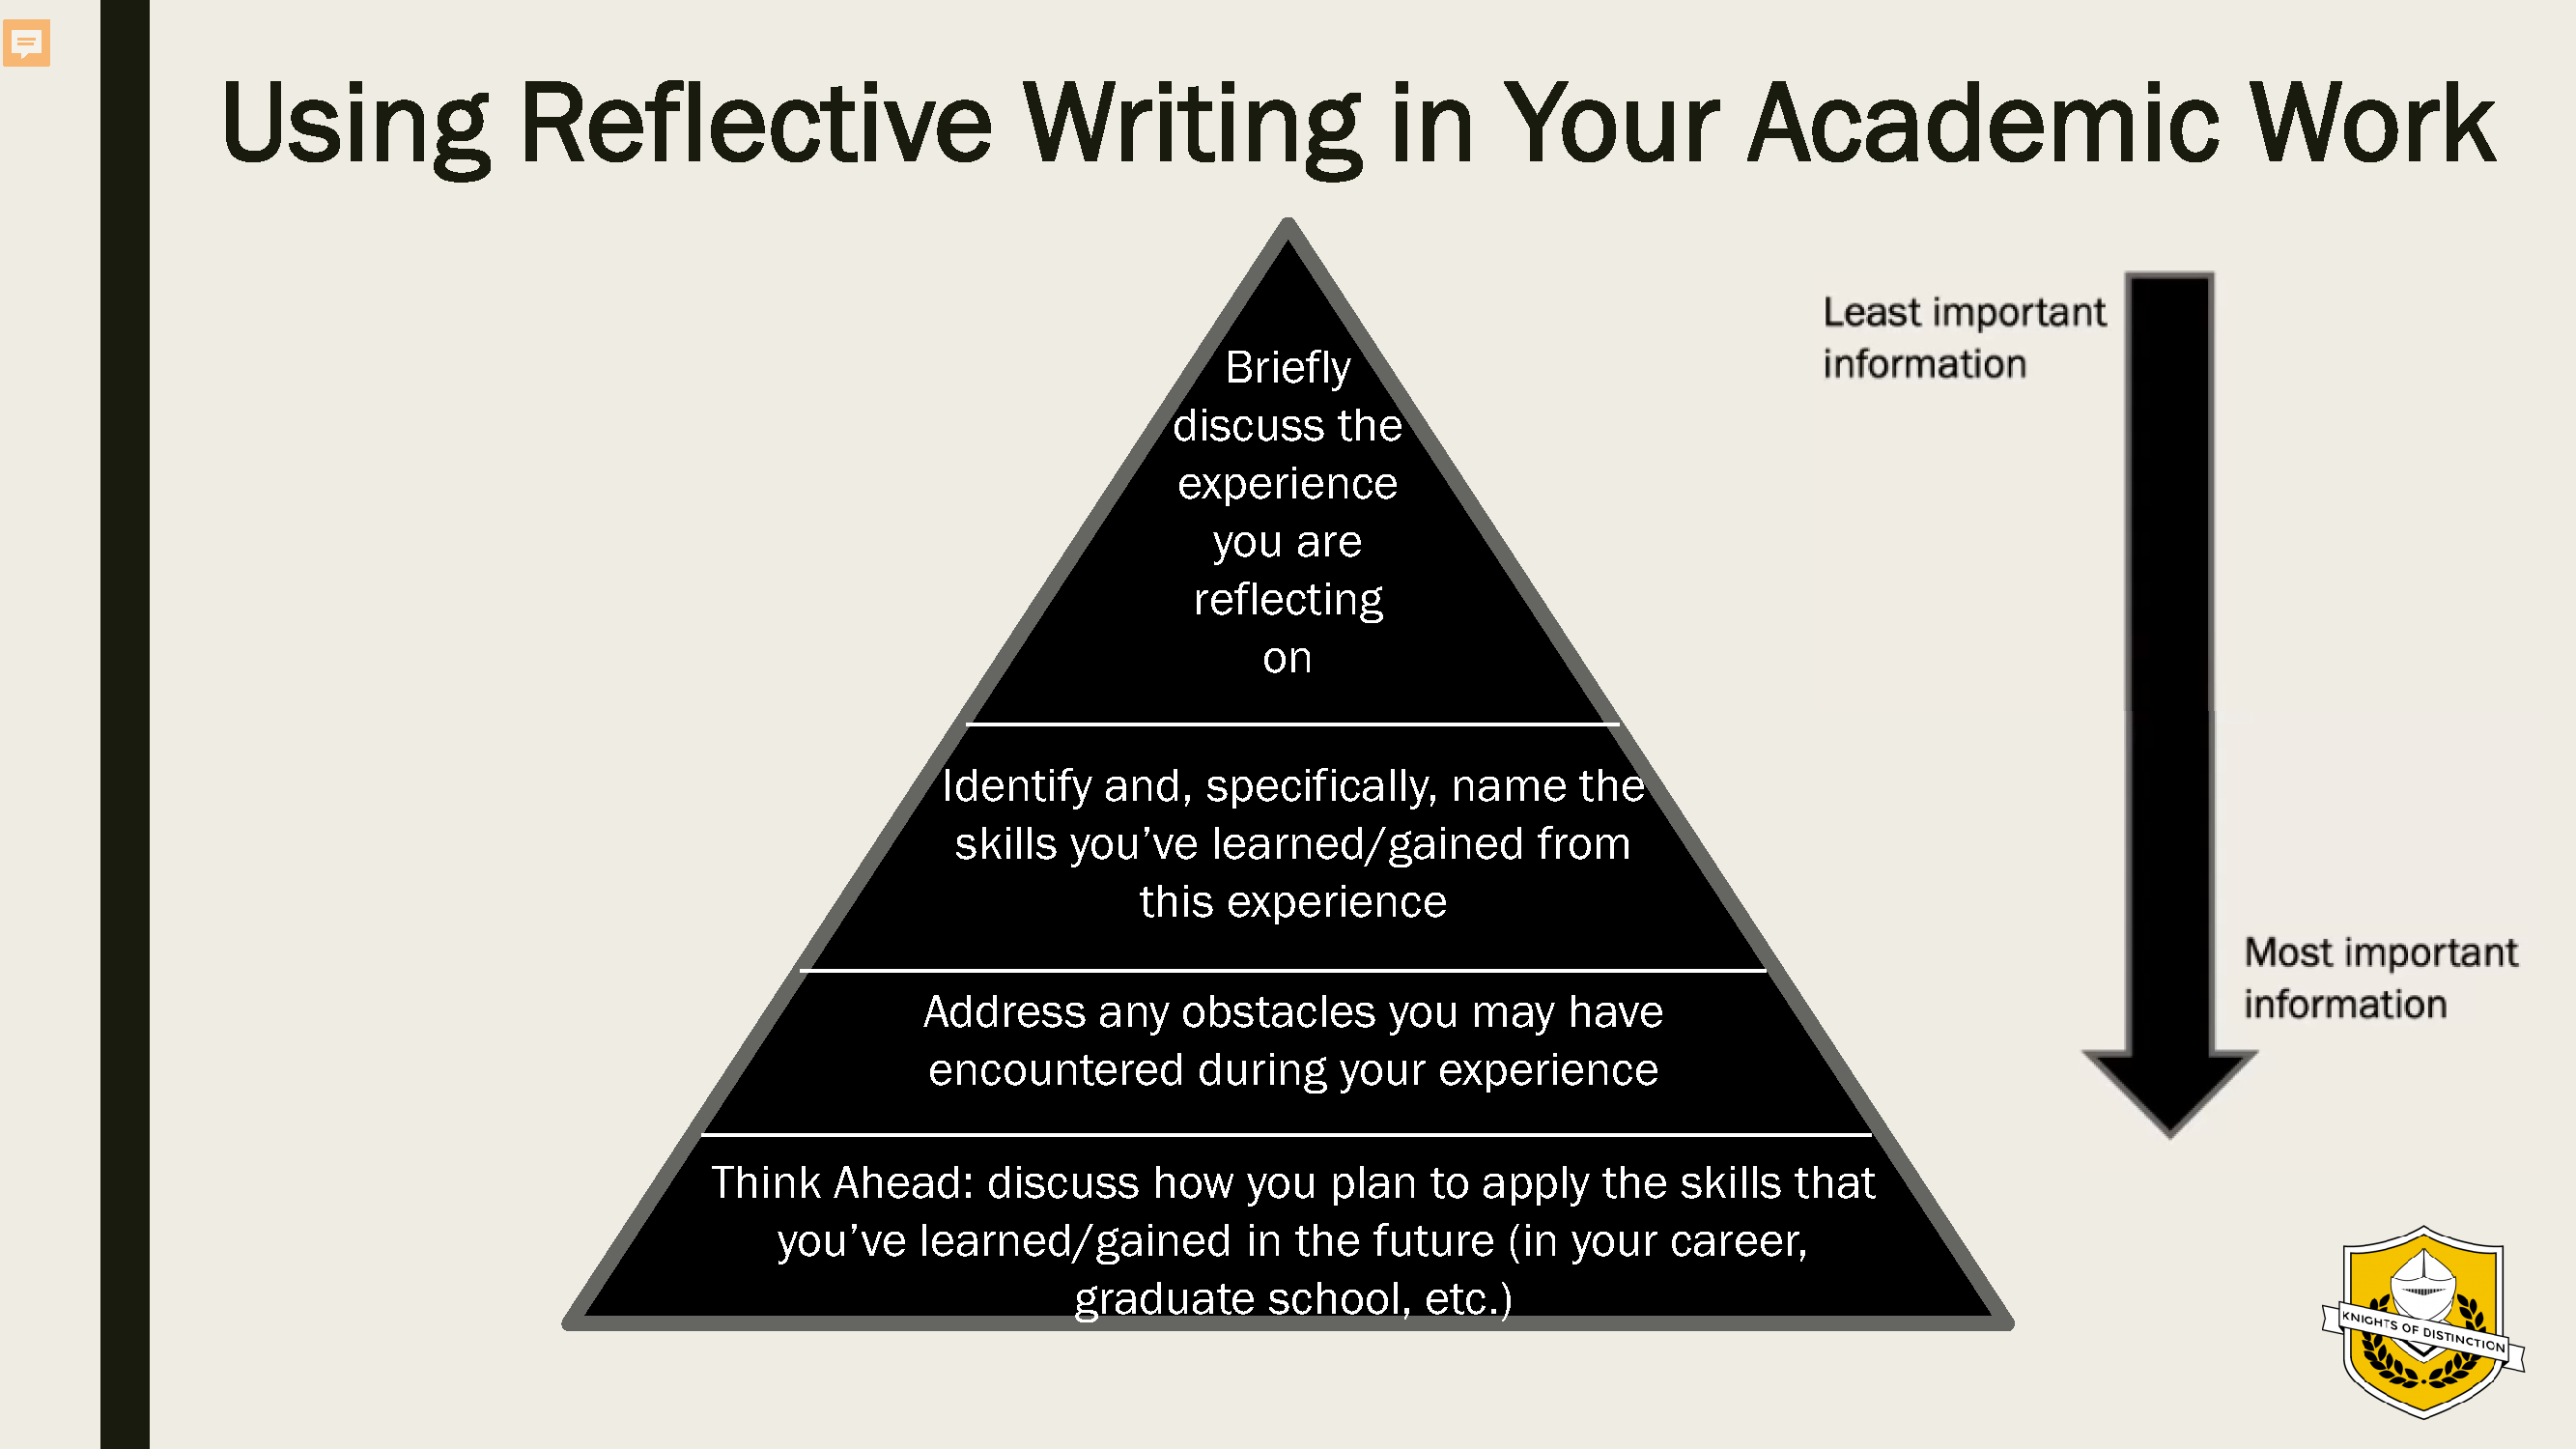 Using Reflective Writing in Your Academic Work. Least important to most important Briefly discuss the experience you are reflecting on. Identify and specifically, name the skills you’ve learned/gained from this experience. Address any obstacles you may have encountered during your experience. Think Ahead: discuss how you plan to apply the skills that you’ve learned/gained in the future (in your career, graduate school, etc.) 